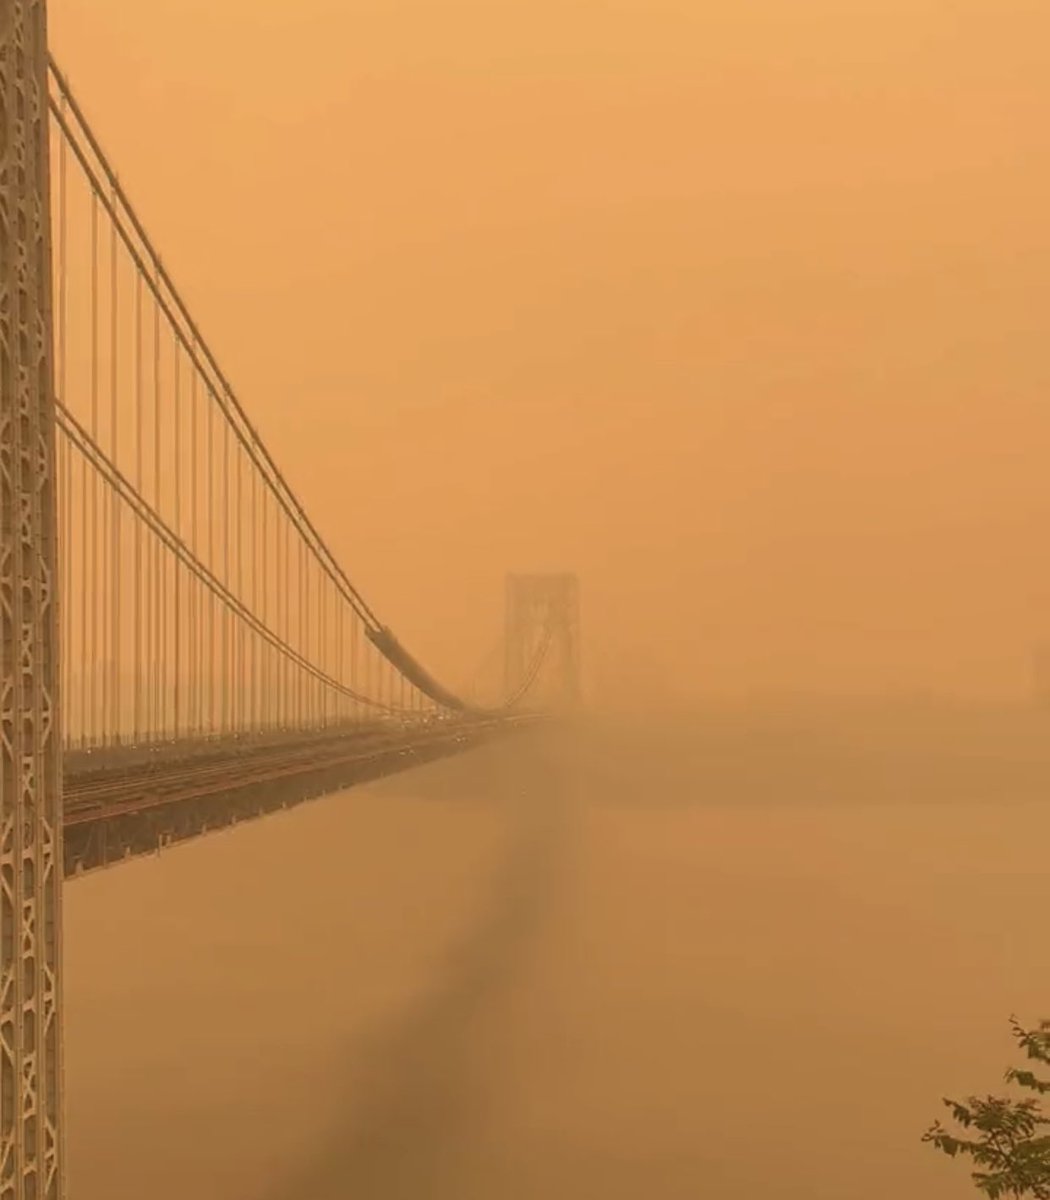 George Washington Bridge, from Manhattan, New York to New Jersey, covered with smoke from Canada wildfires: Watch video